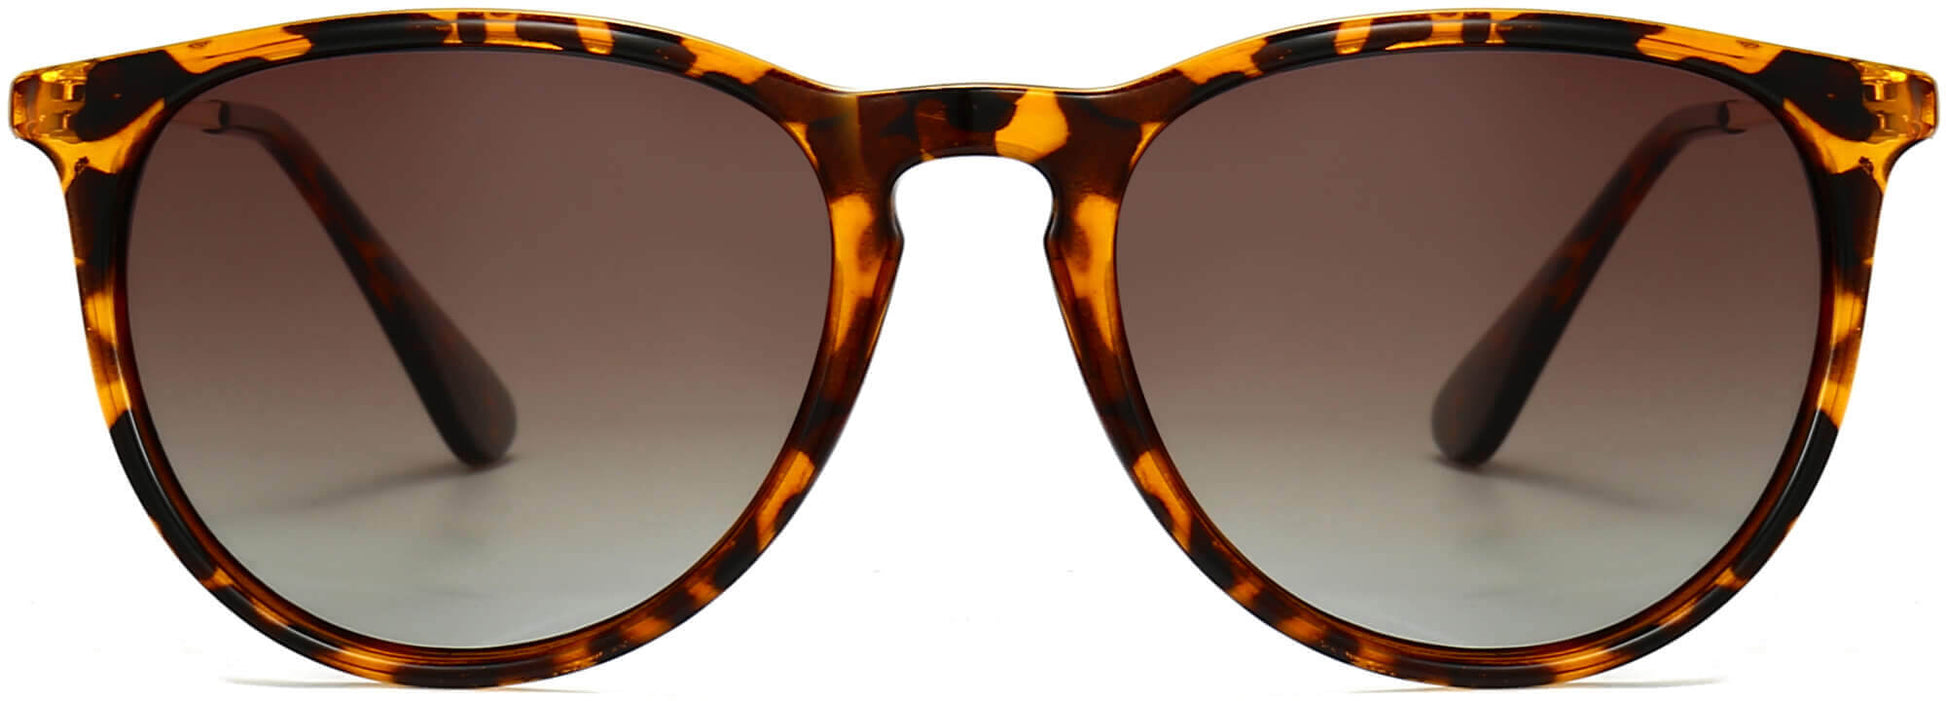 Maddox Tortoise Plastic Sunglasses from ANRRI, front view